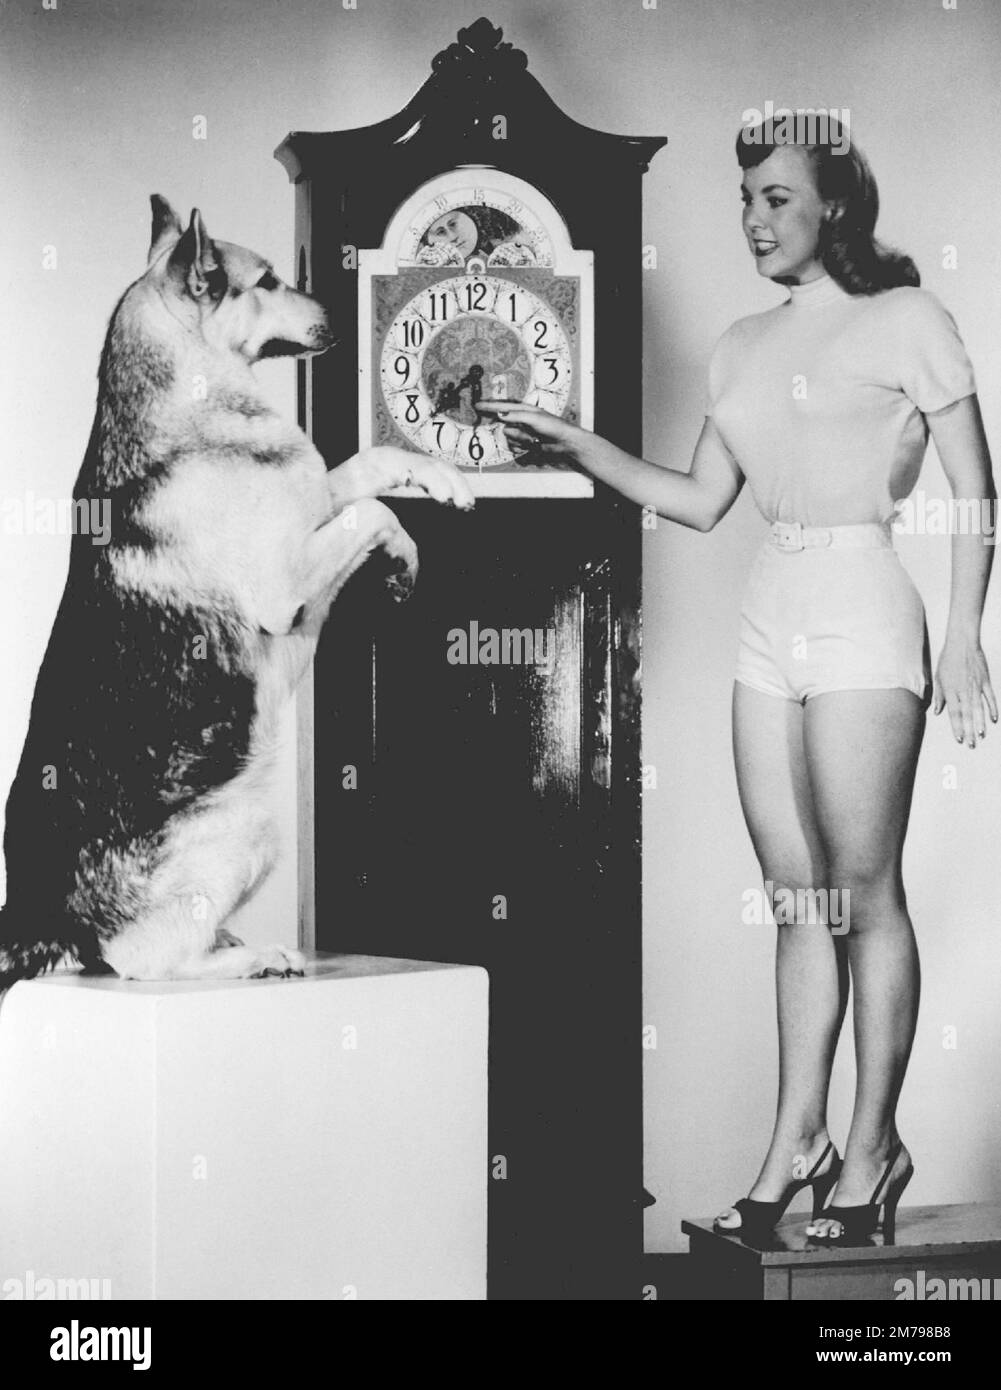 Promotional photo of Rin Tin Tin and actress Jana Lund reminding people that Daylight Saving Time would soon begin - 1954 - 1959 Stock Photo